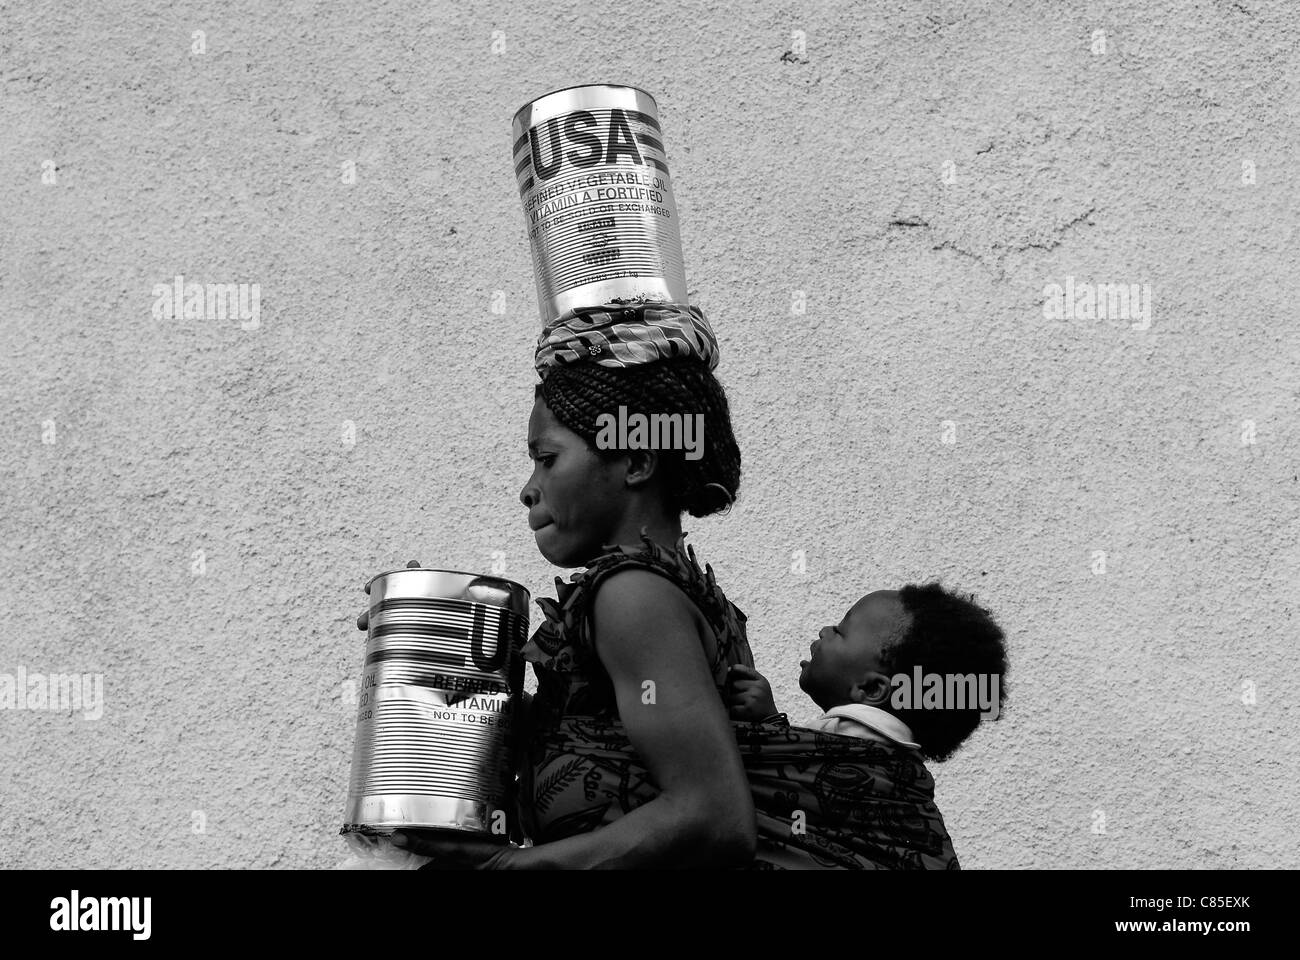 An internally displaced woman carrying cans of refined vegetable oil donated by USAID at World Food Programme WFP distribution point in North Kivu province, DR Congo Africa Stock Photo